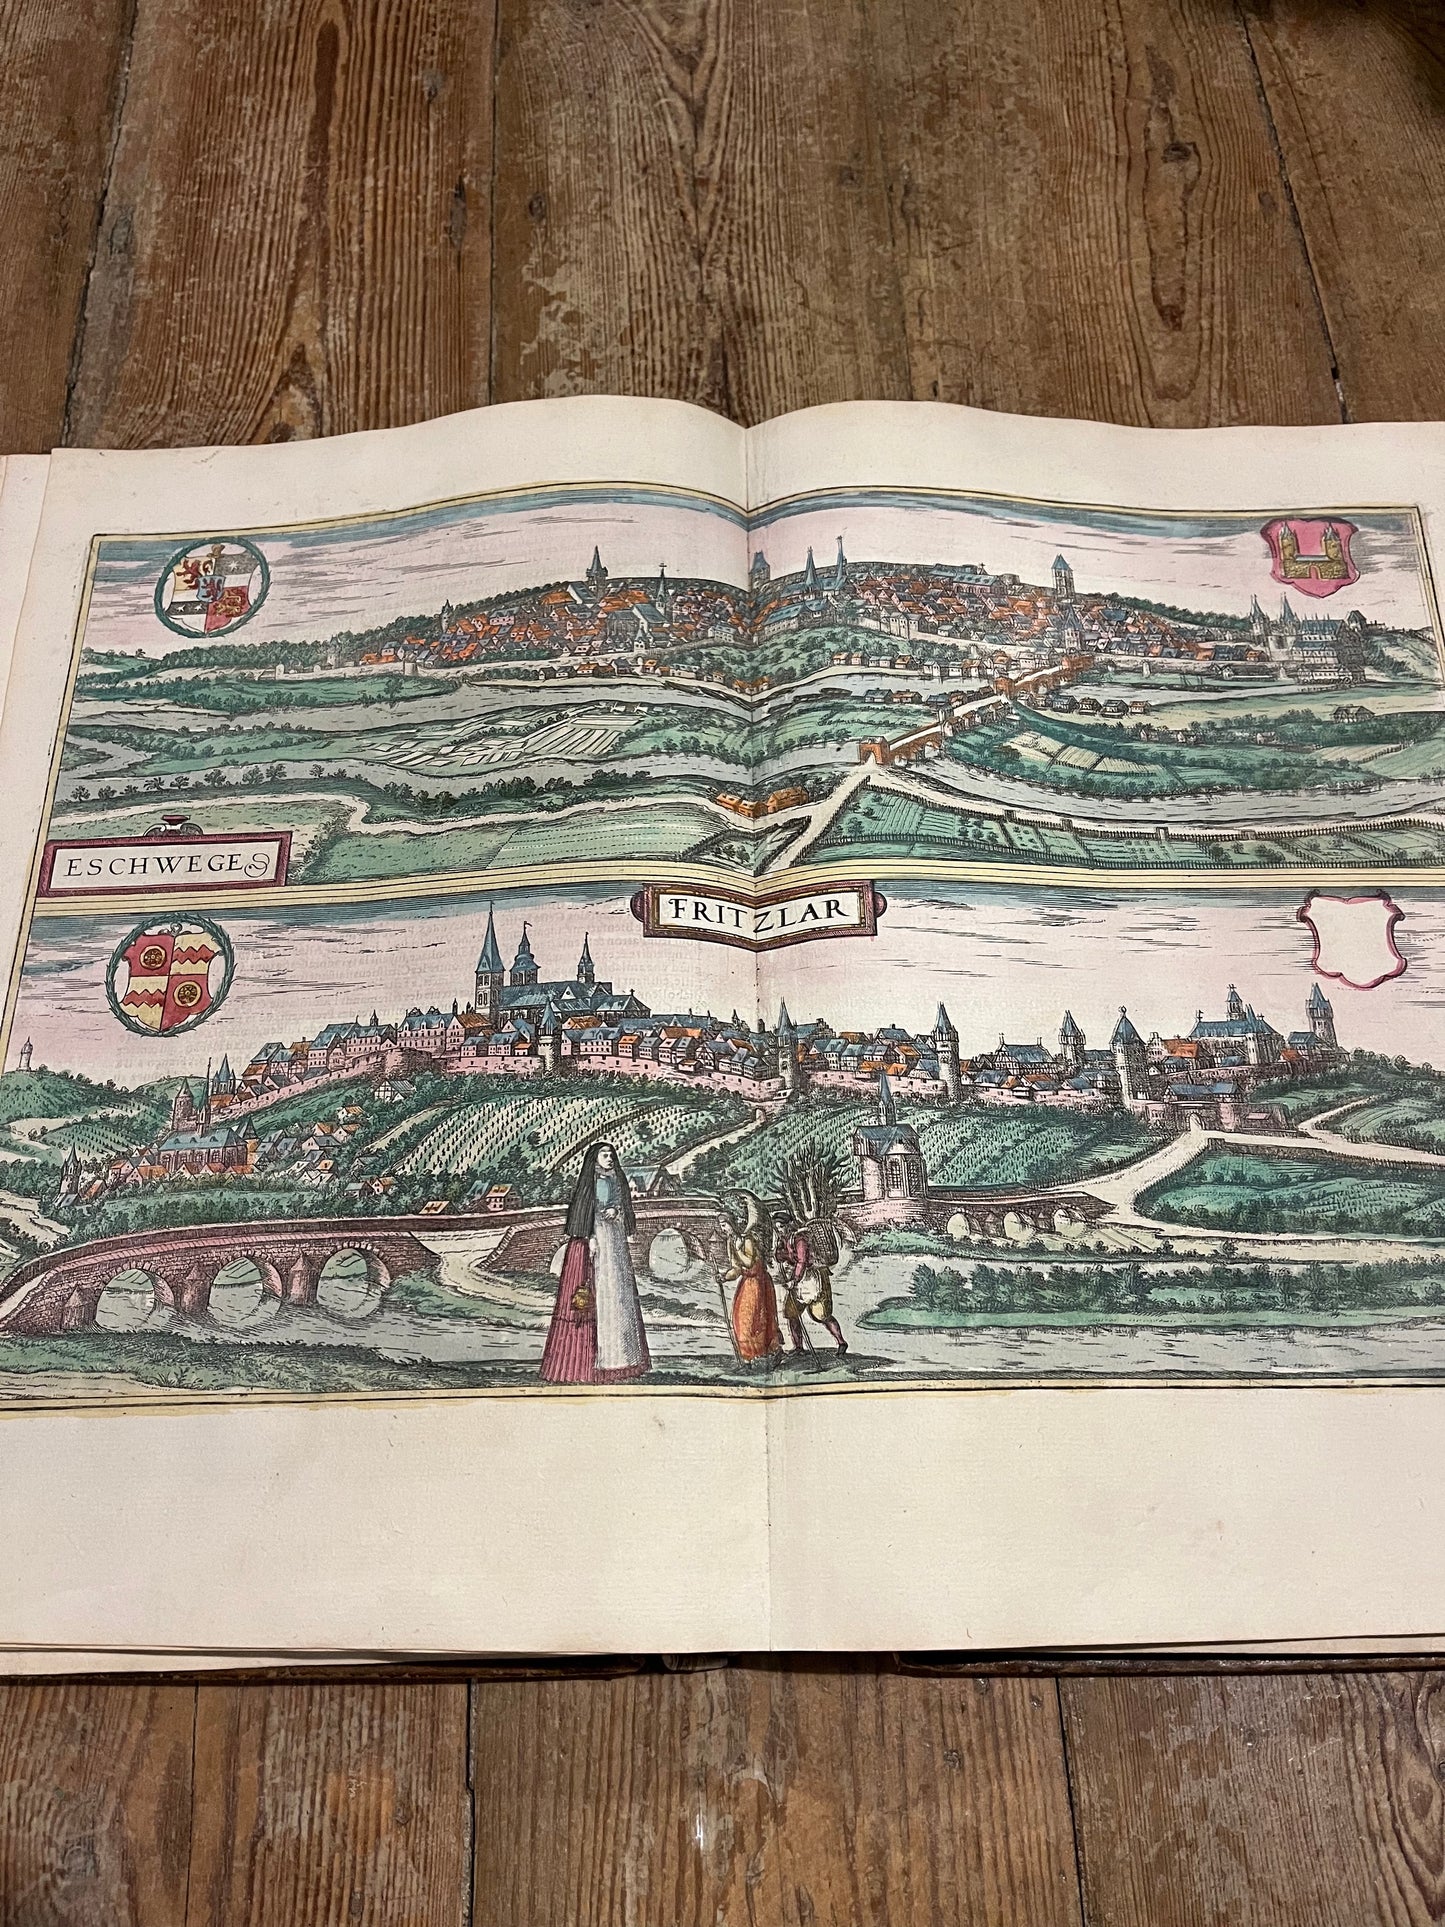 Rare large fragment of Braun and Hogenberg’s famous “Civitates Orbis Terrarum” - “Cities of the world”